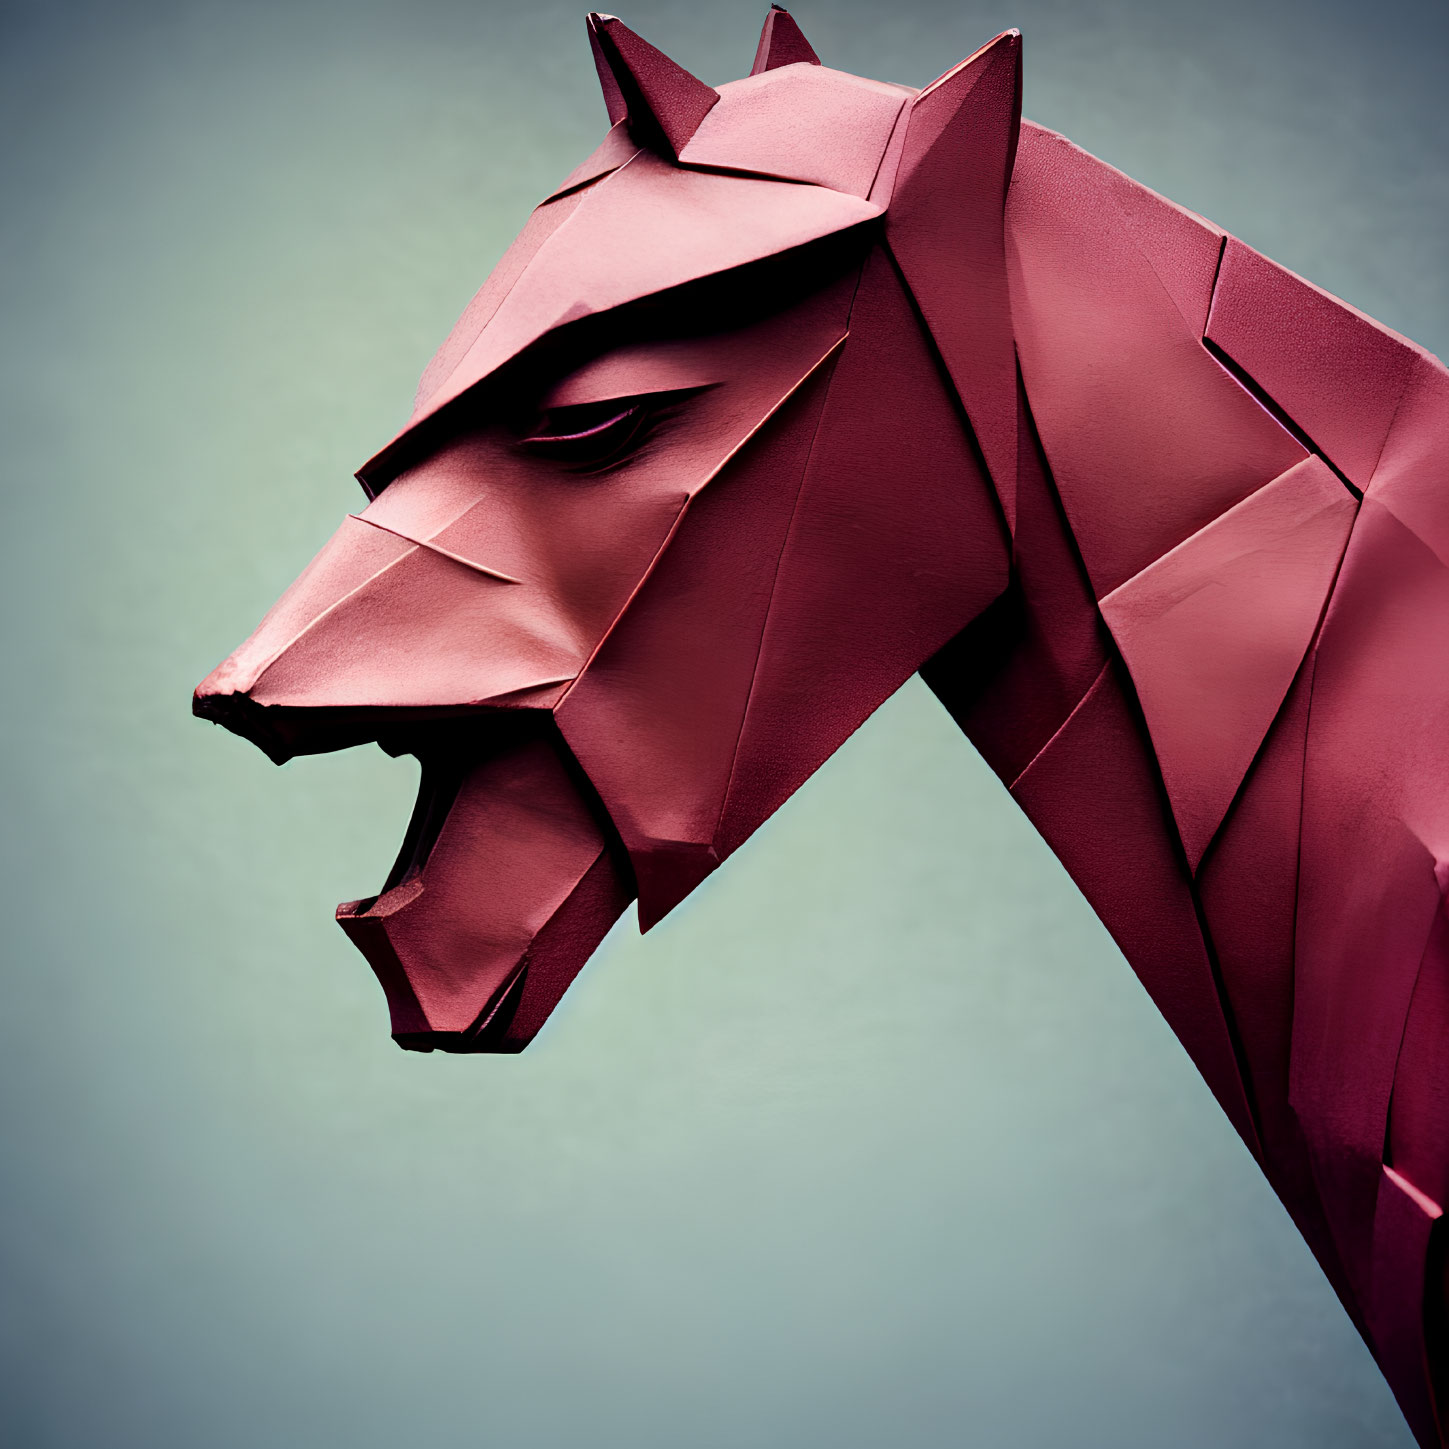 Red Wolf Head Sculpture with Geometric Origami Design on Blue Gradient Background